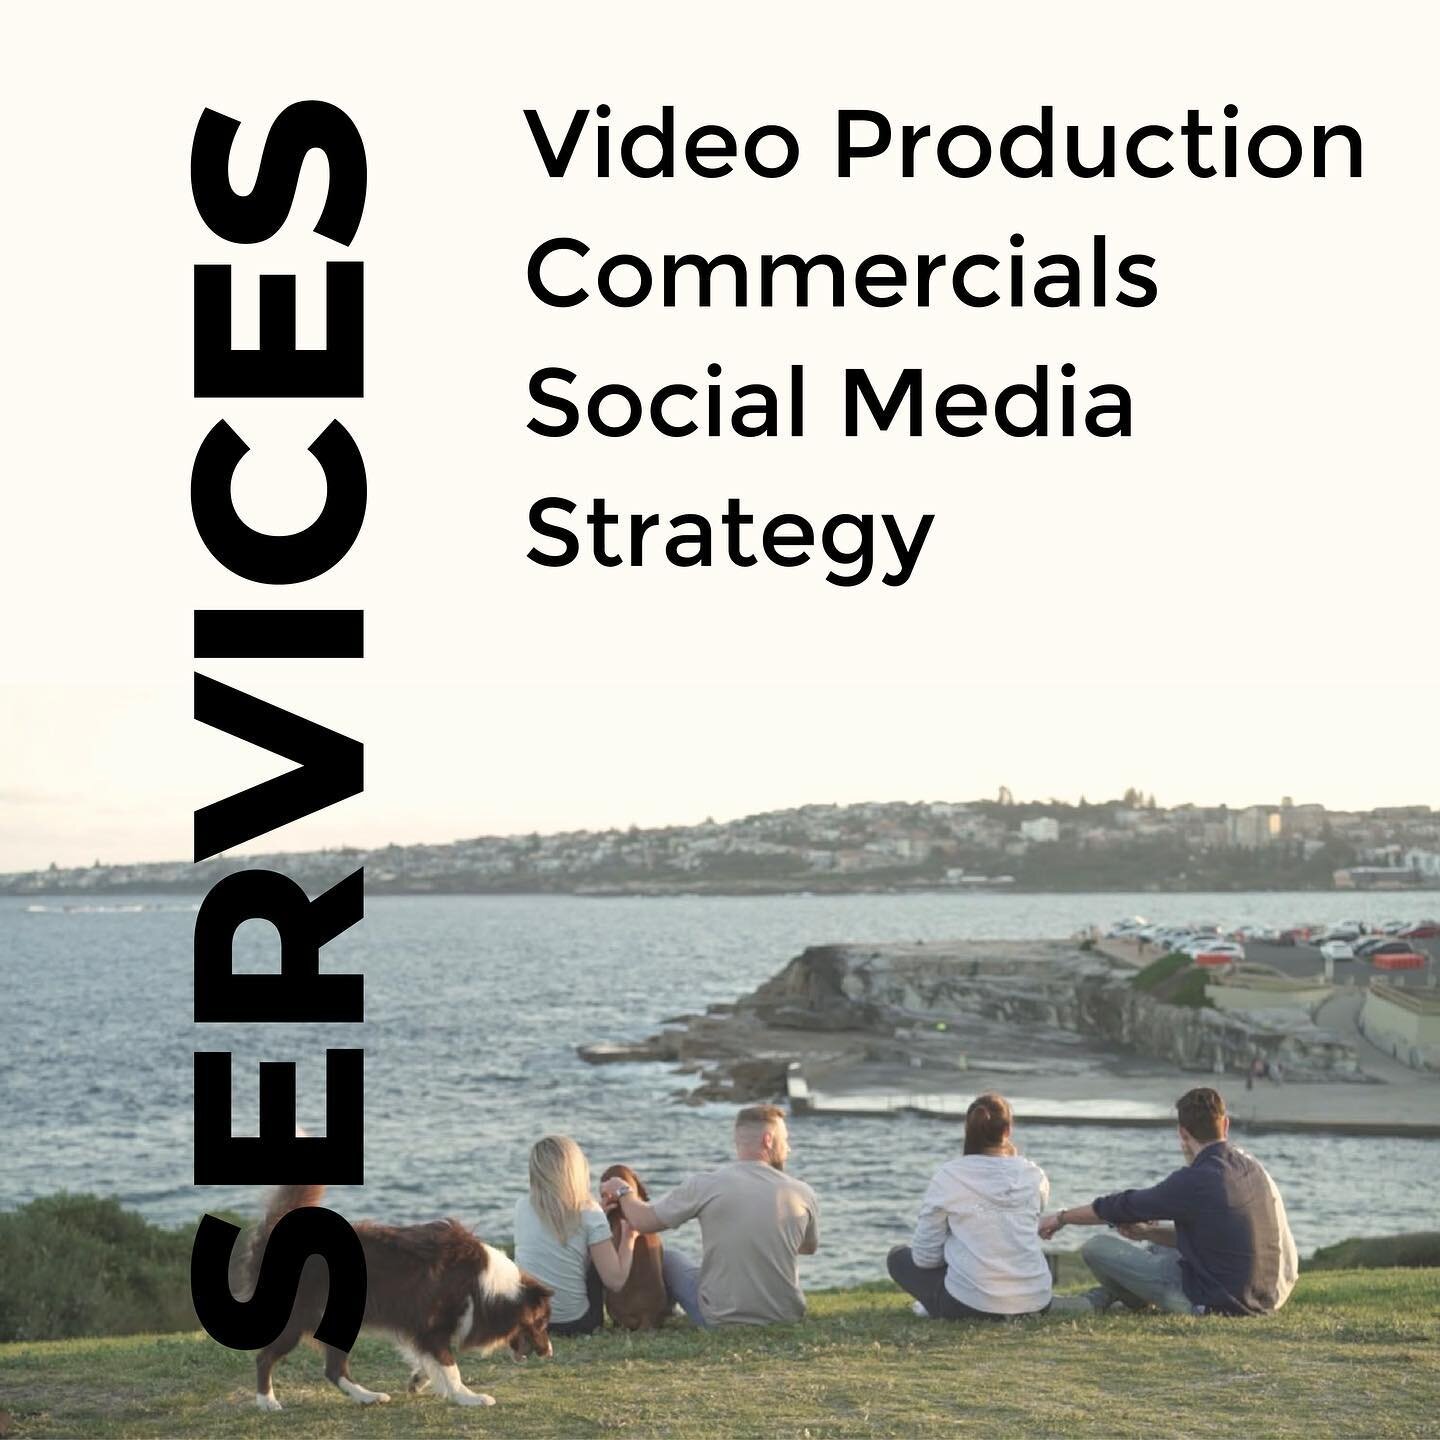 Turn ideas into outcomes. 

We support ambitious brands with all things video production, social media &amp; strategy